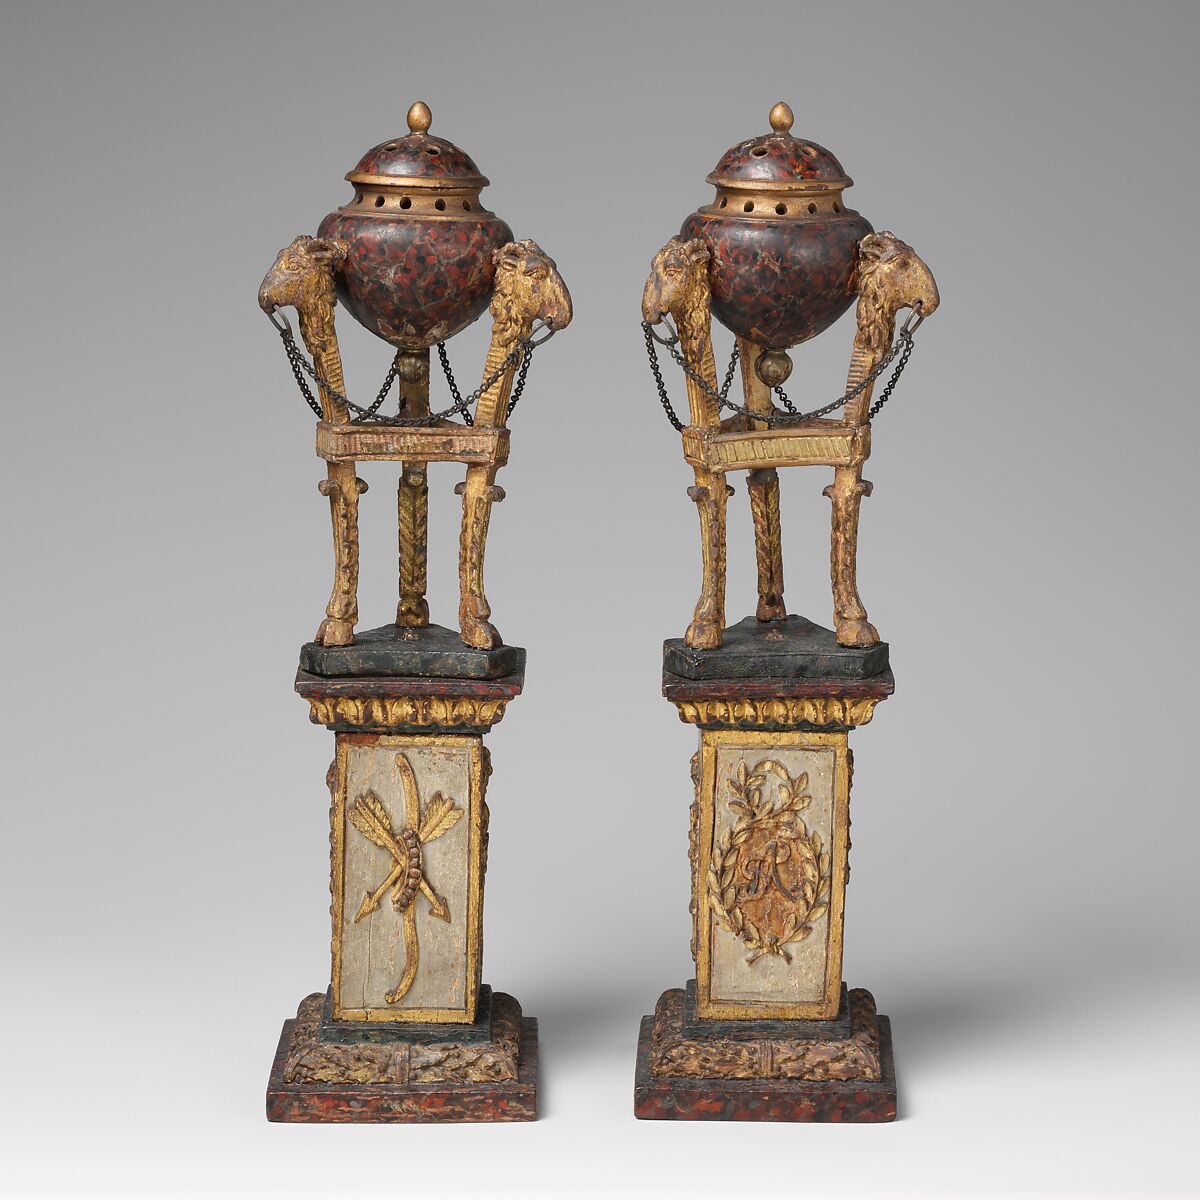 Pair of models of perfume burners, Painted and gilded wood, French 